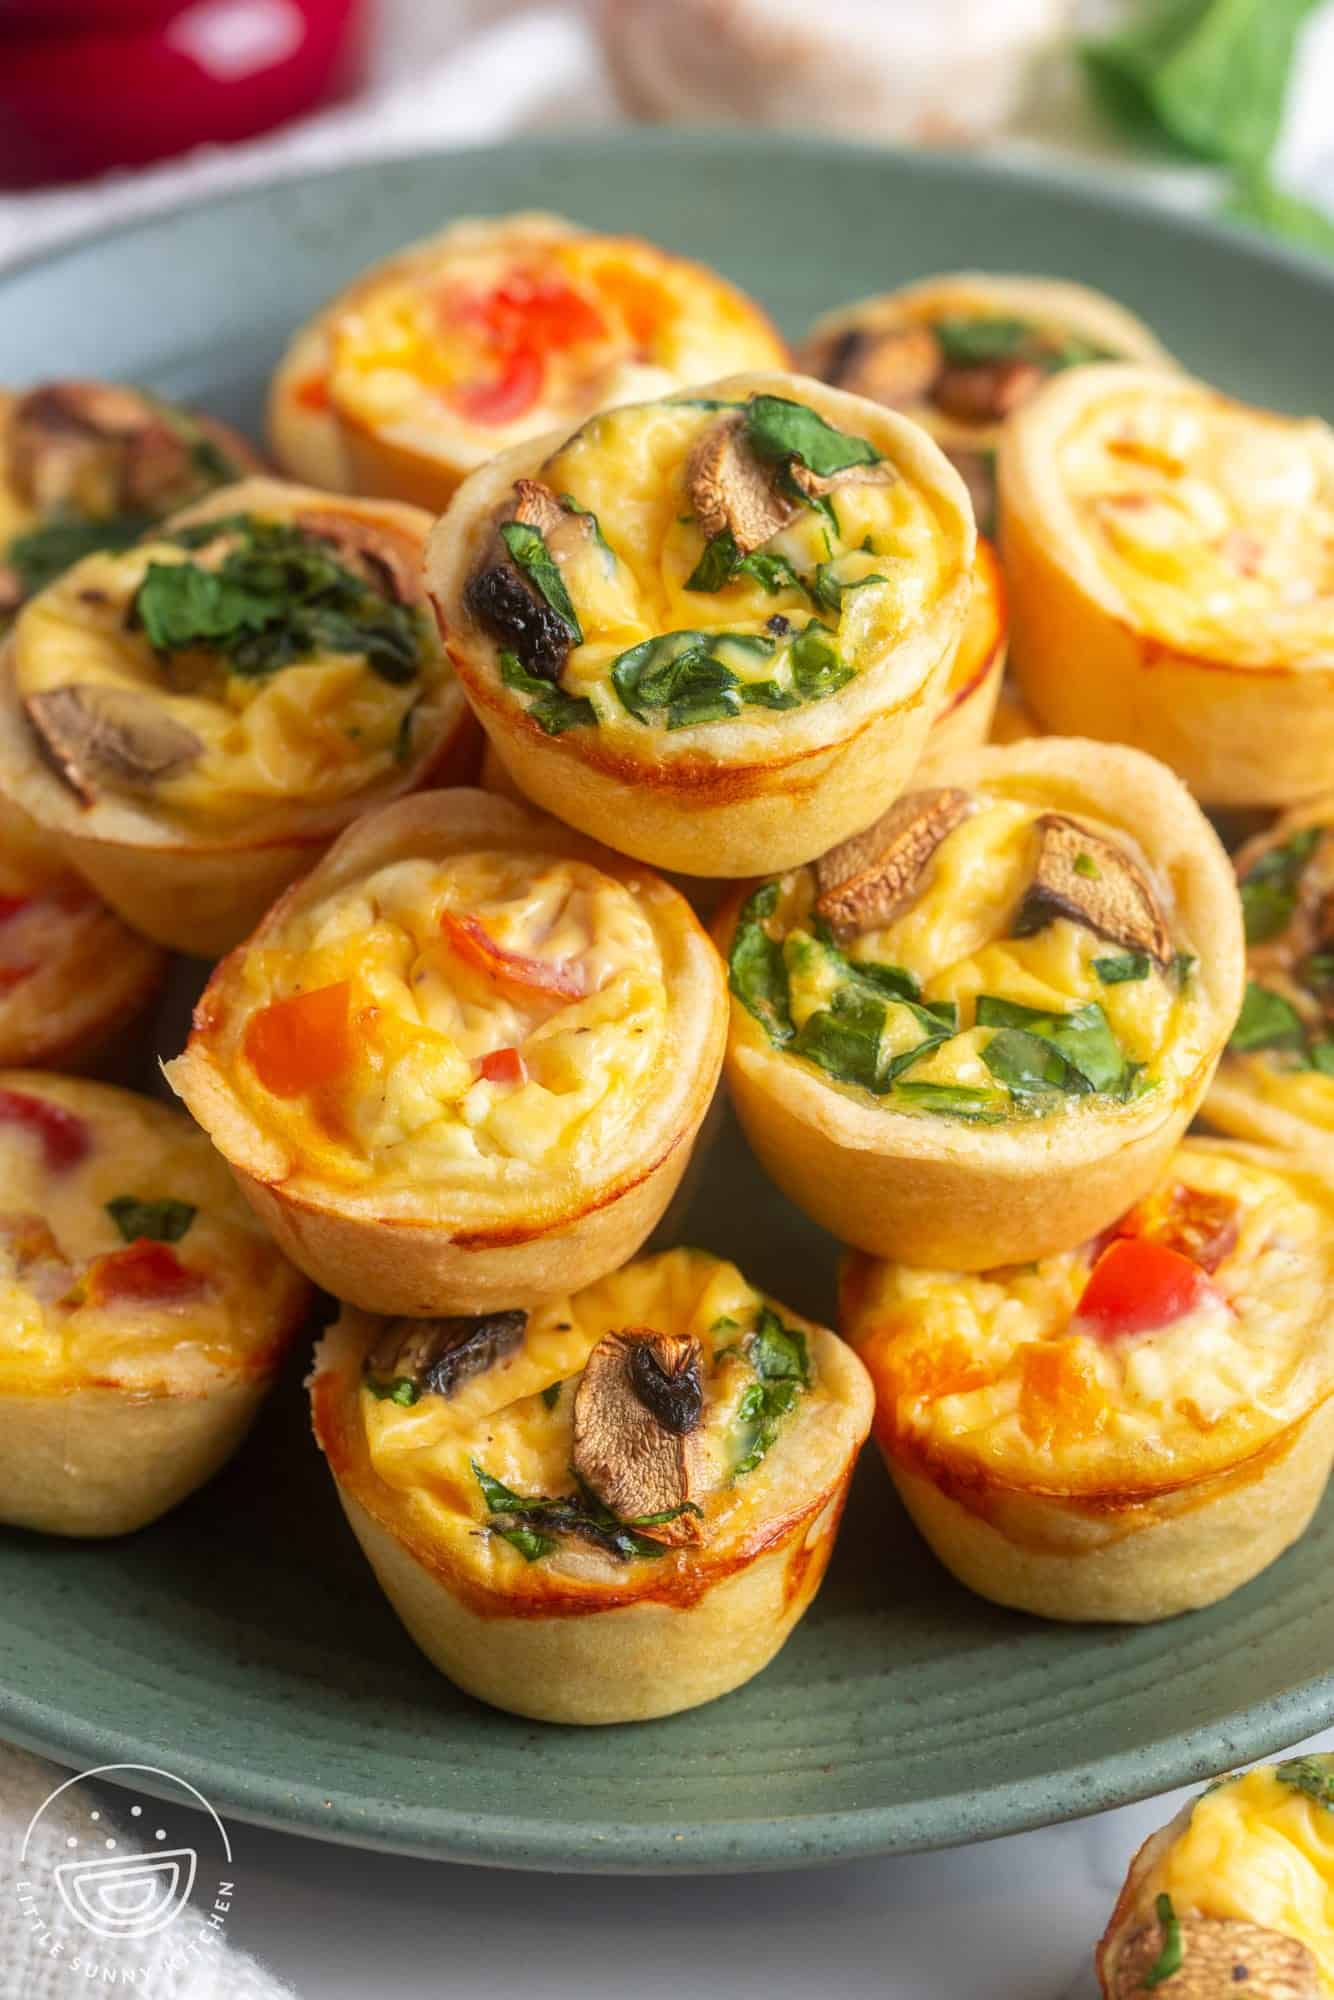 a green ceramic plate holding stacked mini quiches filled with veggies.